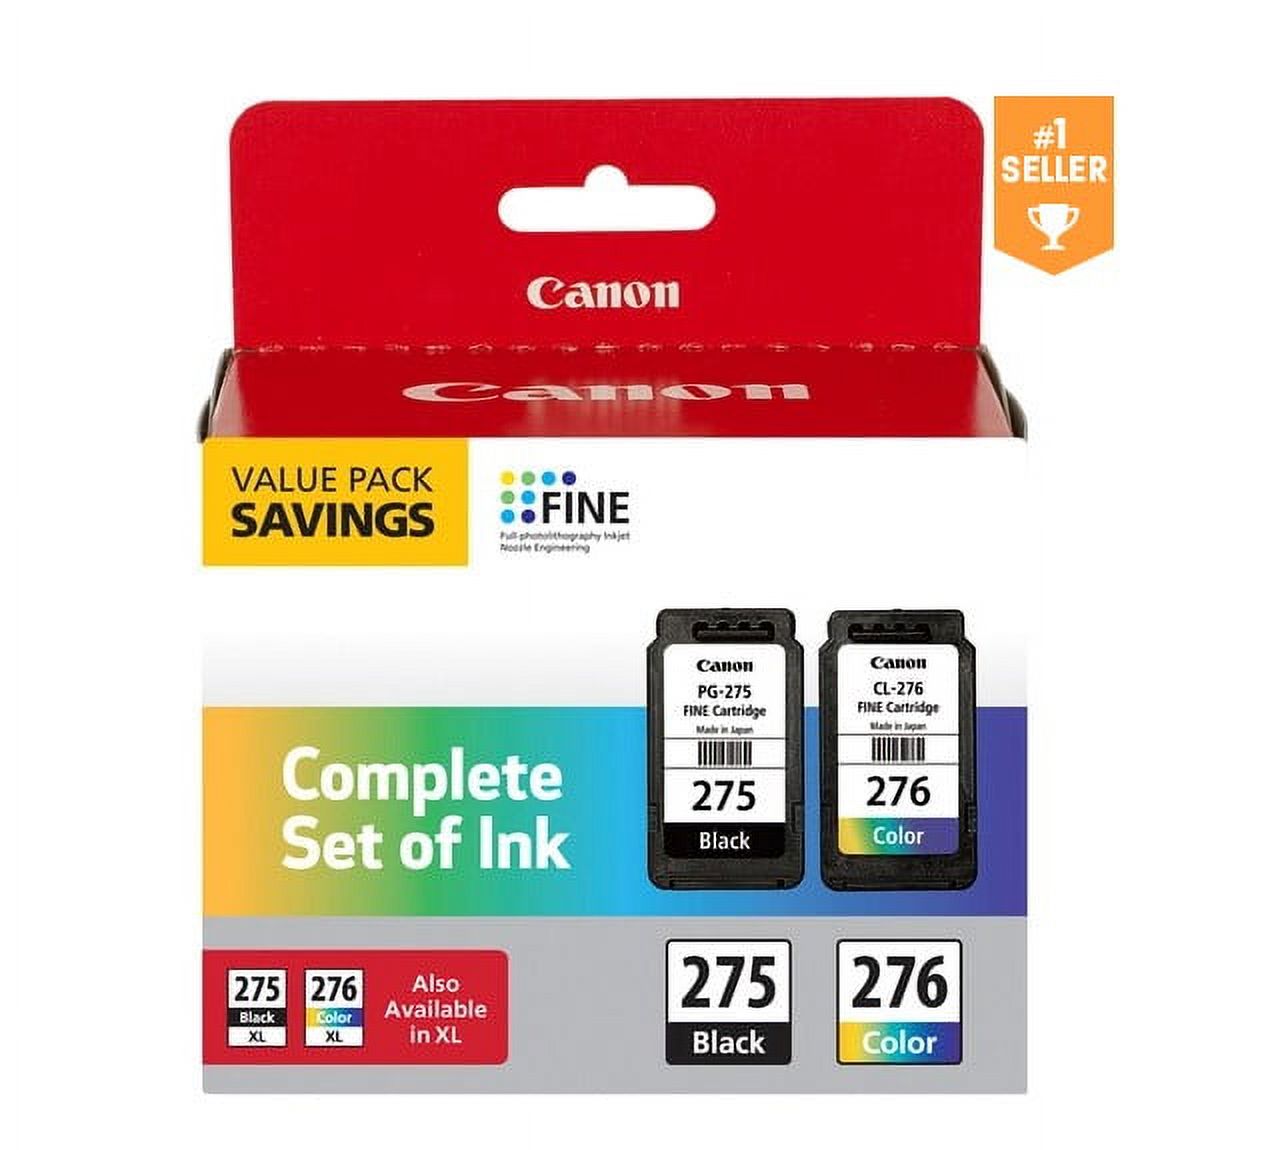 Canon PG-275, CL-276 Value Pack Complete Set of Ink - image 1 of 4